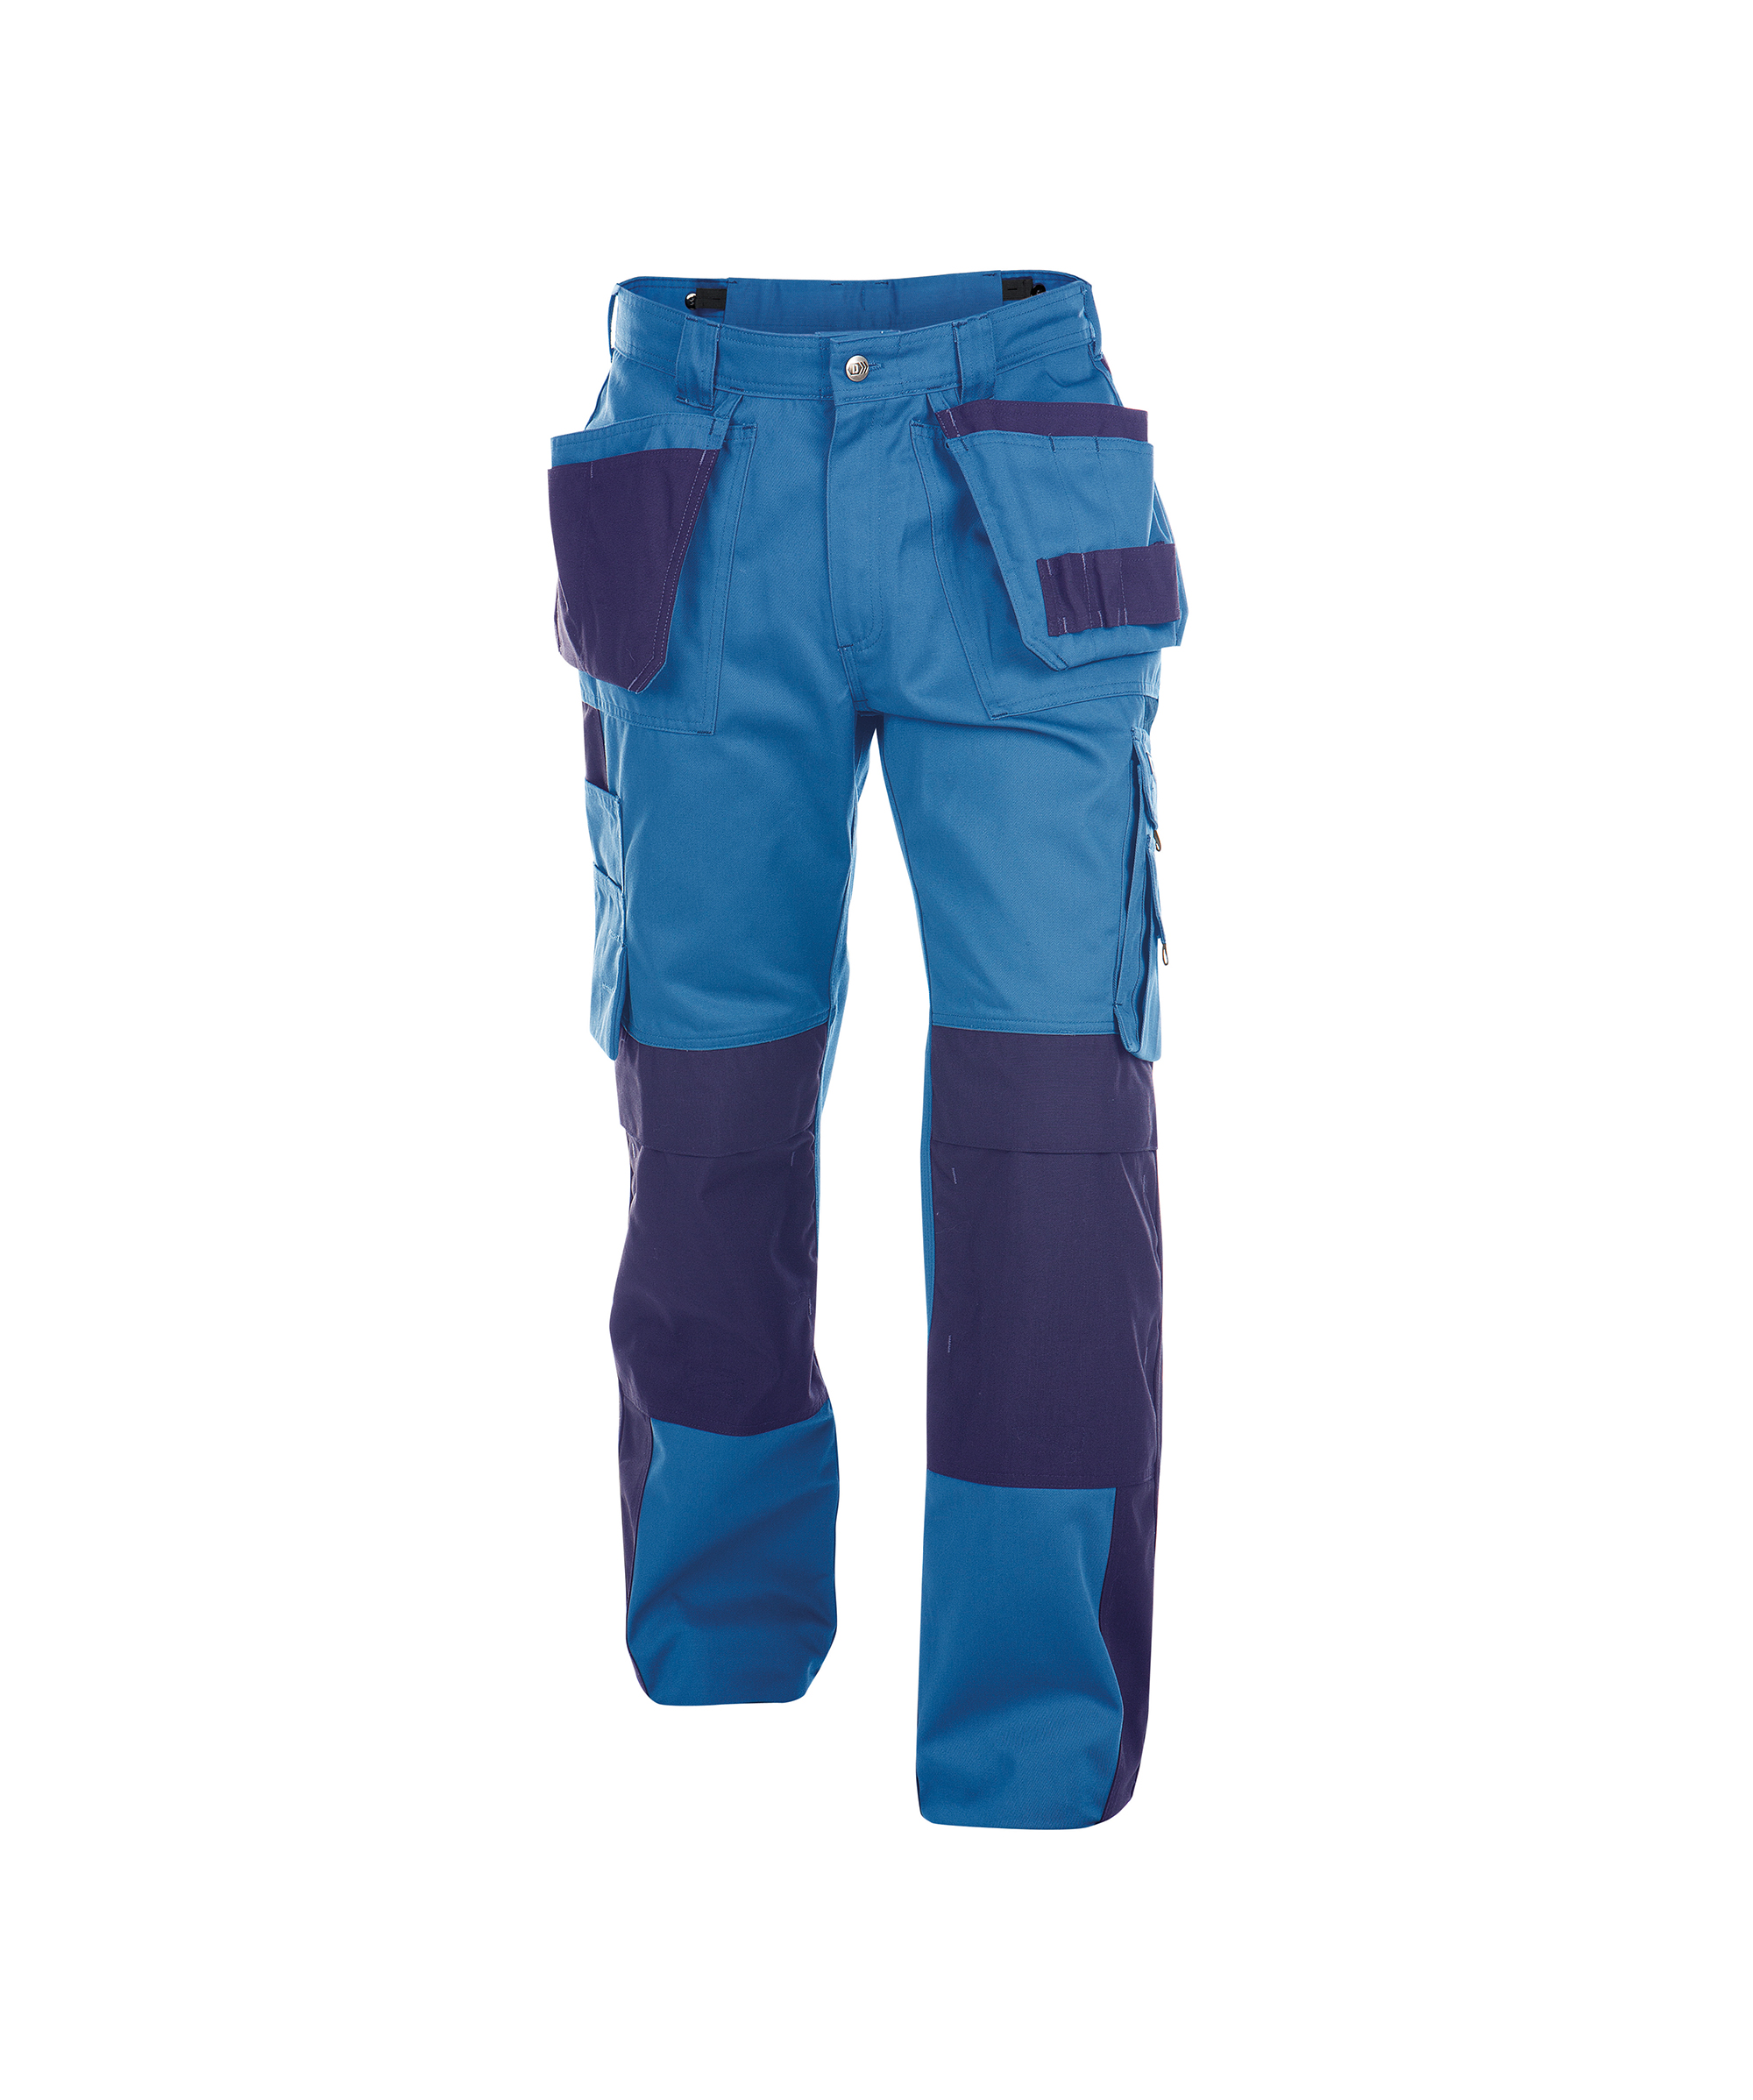 seattle_two-tone-work-trousers-with-multi-pockets-and-knee-pockets_royal-blue-navy_front.jpg